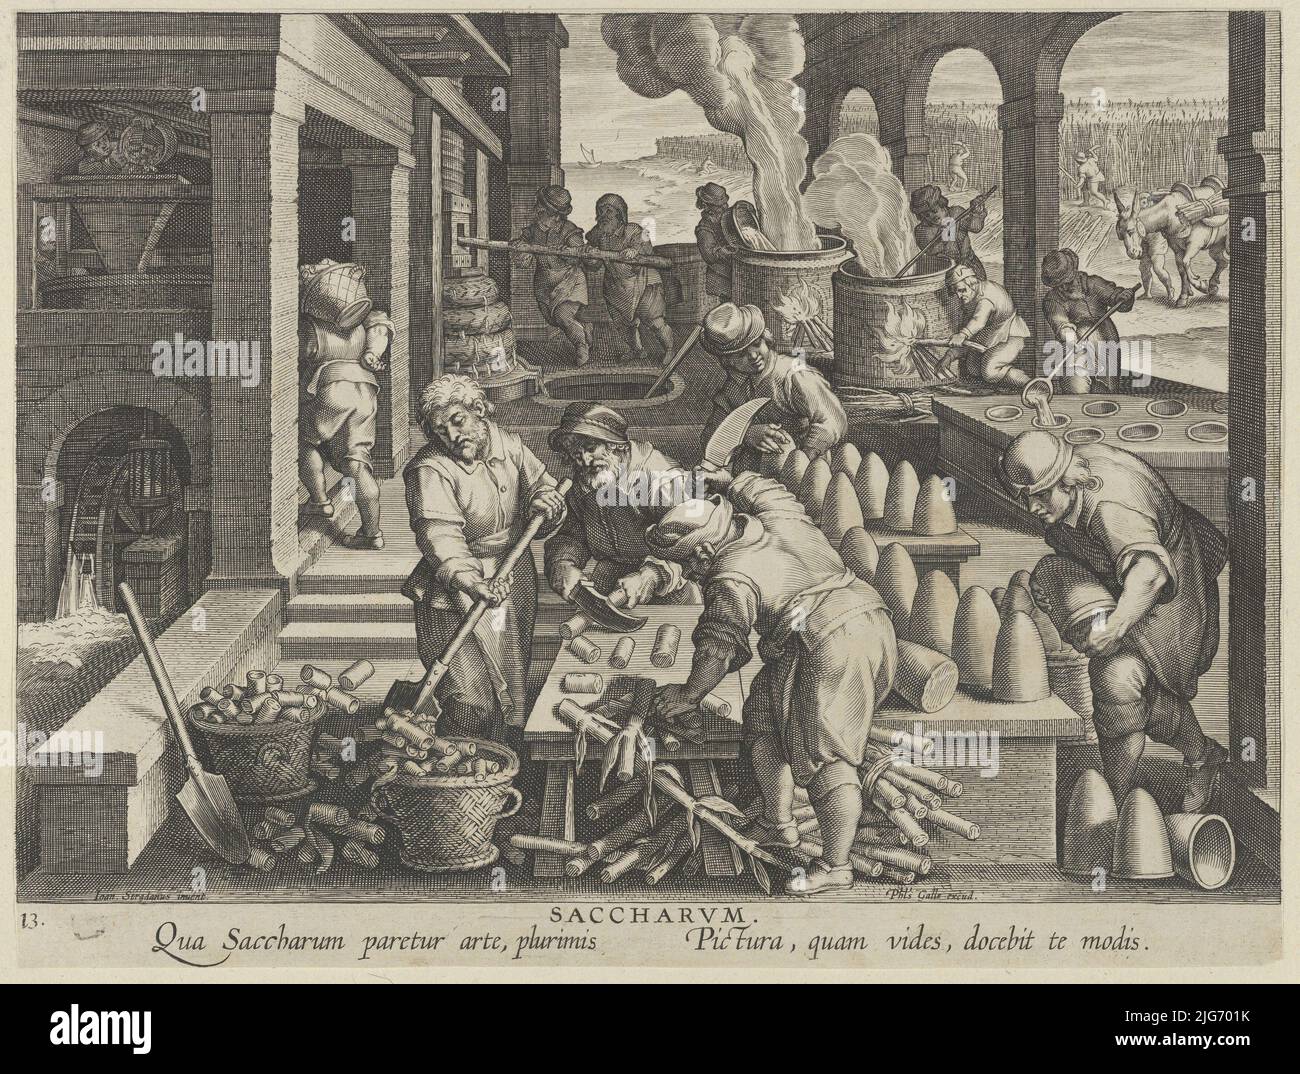 New Inventions of Modern Times [Nova Reperta], The Invention of Sugar Refinery, plate 13, ca. 1600. Stock Photo